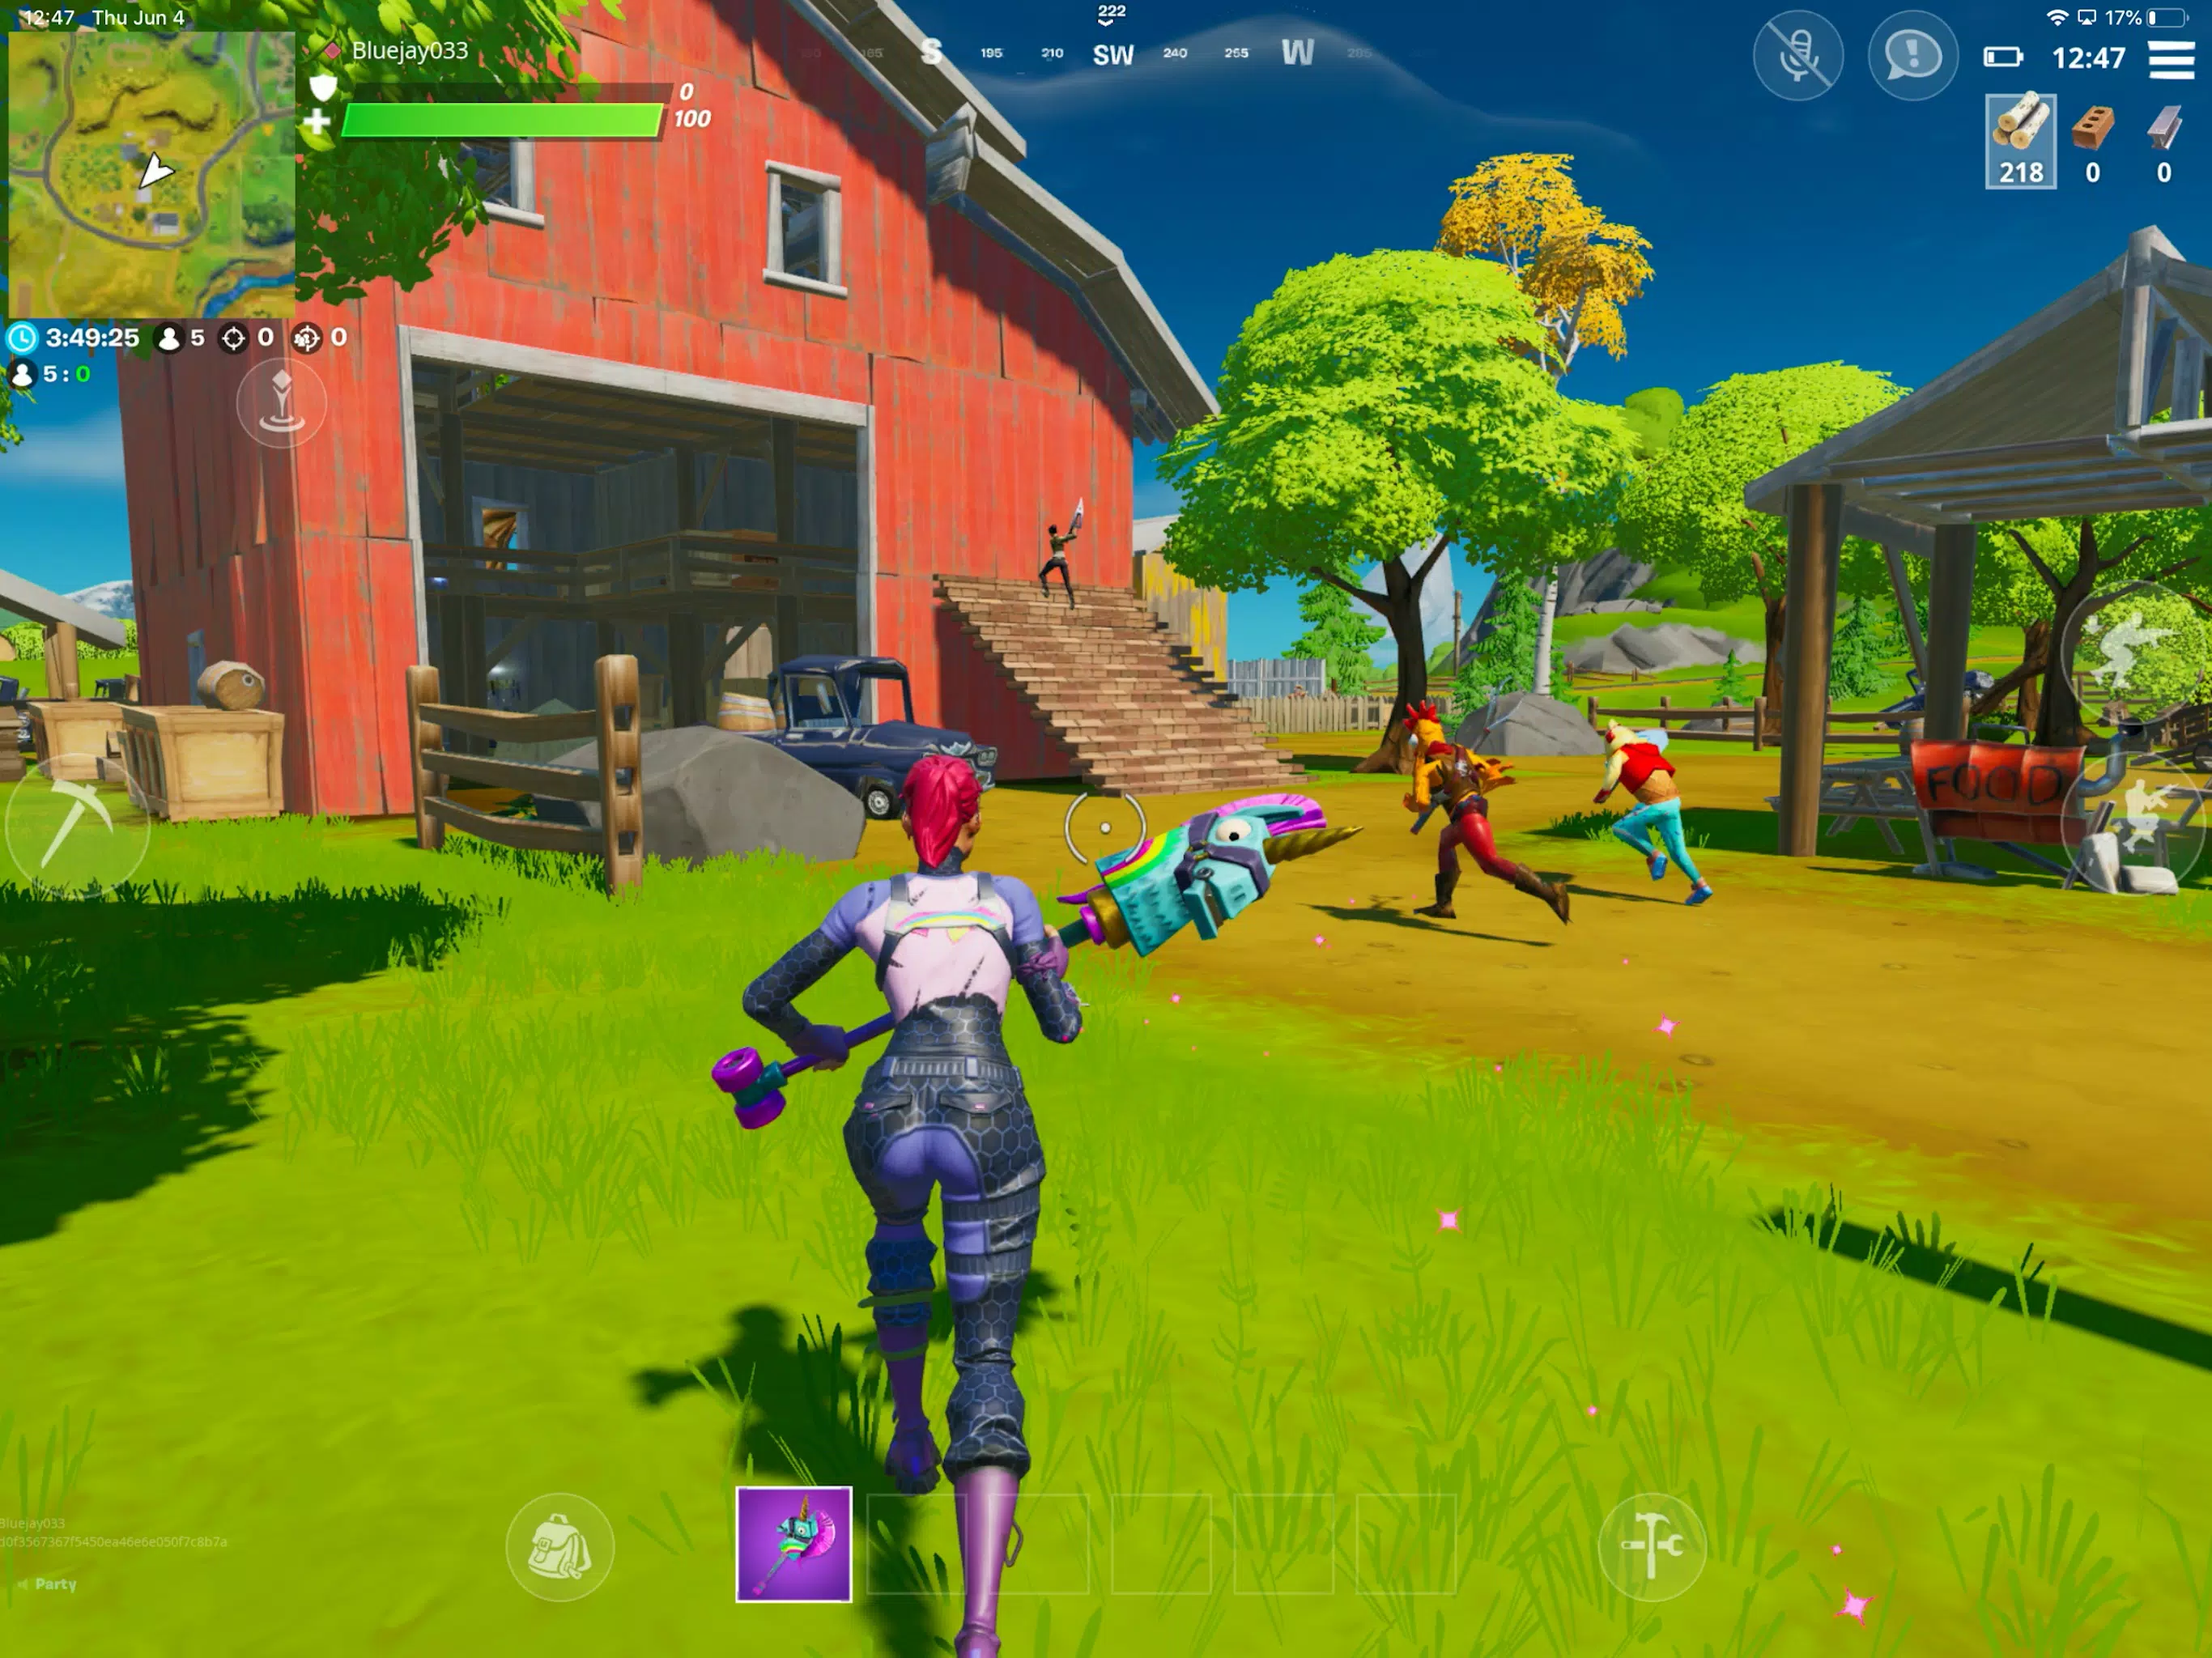 Fortnite for Android - APK Download